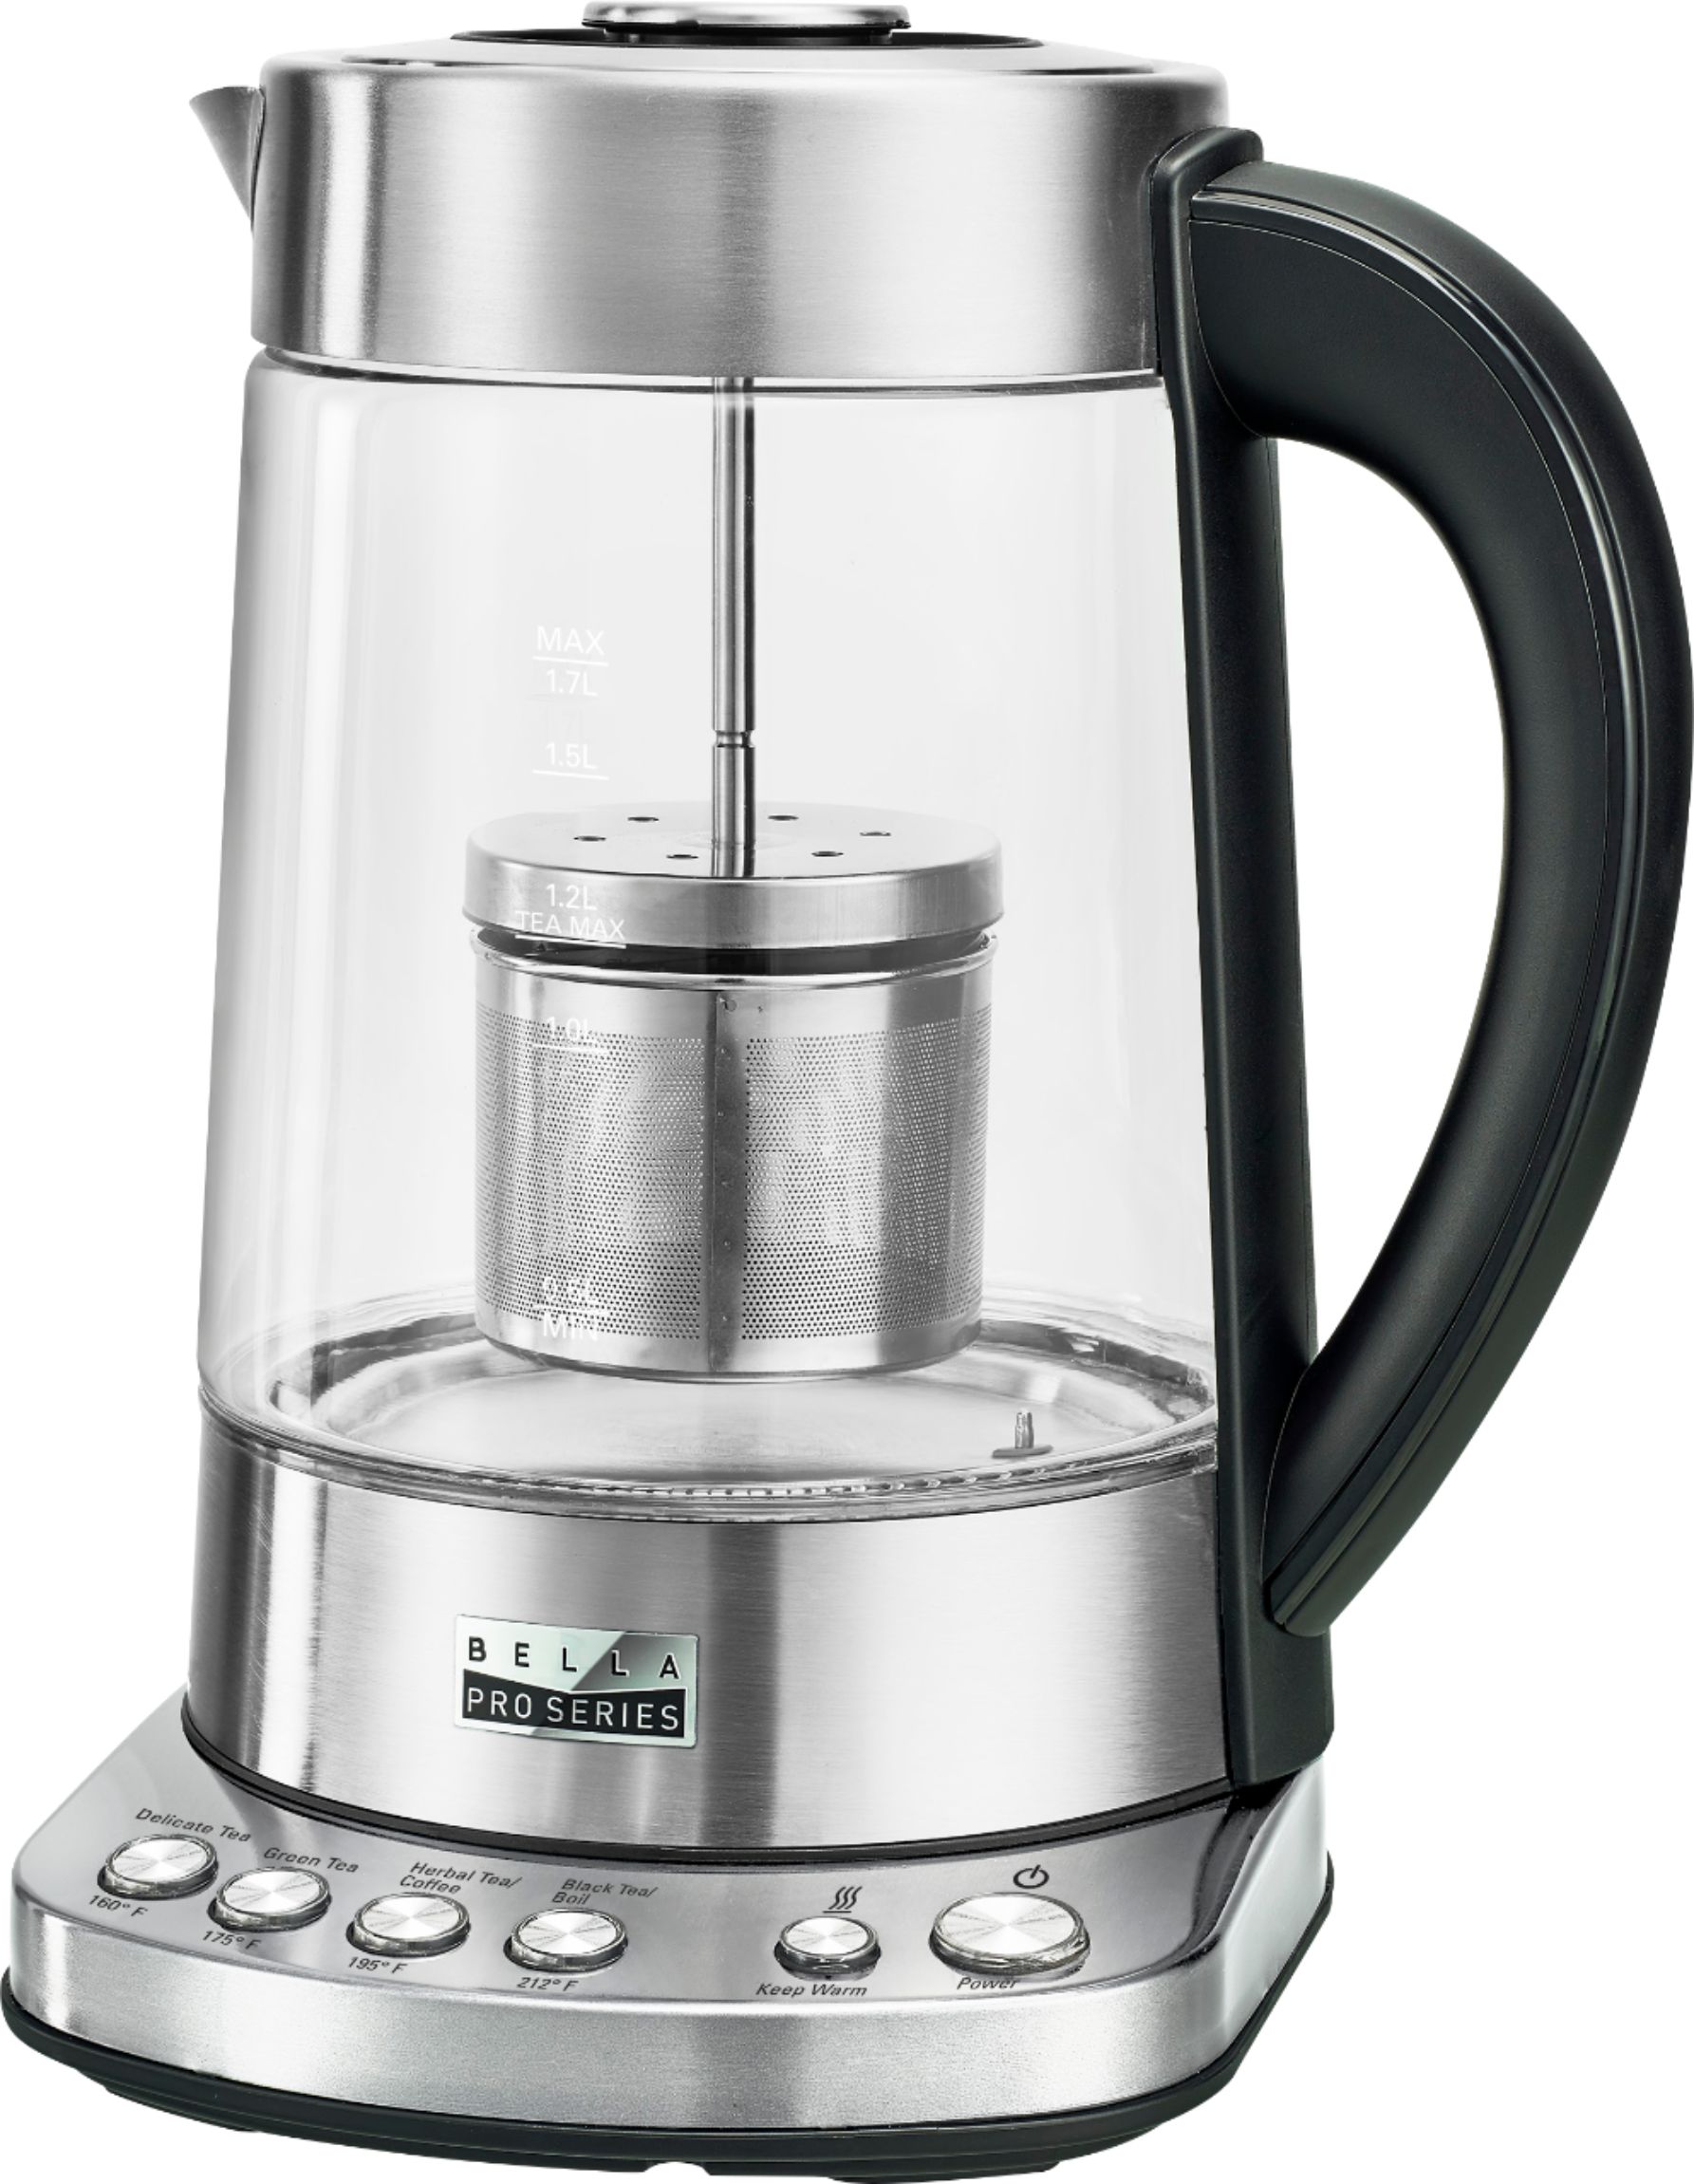 Left View: Bella Pro Series - Pro Series 1.7L Electric Tea Maker/Kettle - Stainless Steel